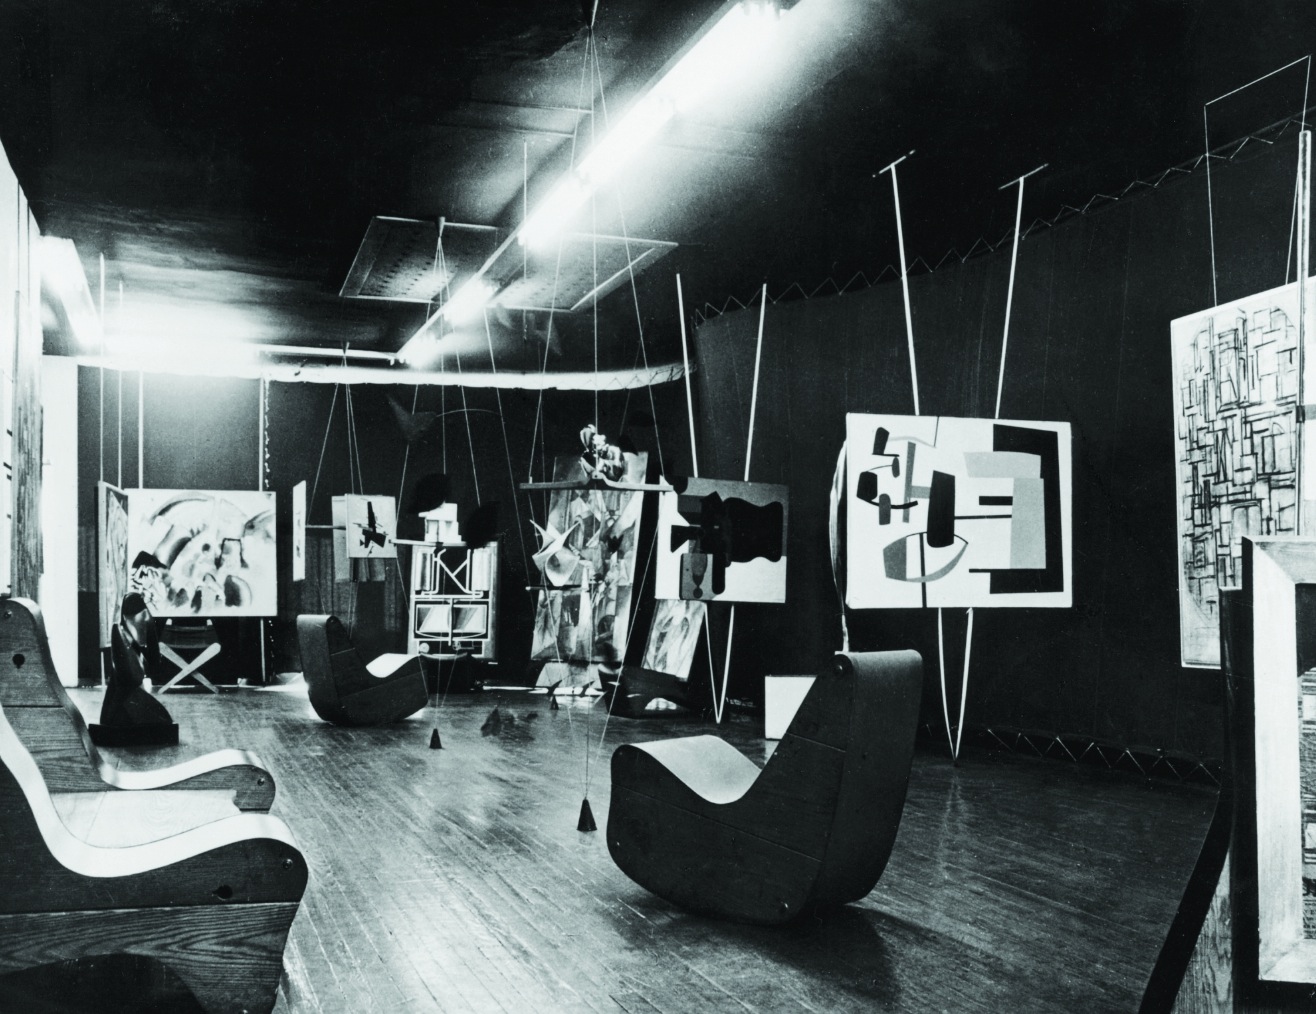 The Abstract Gallery of Art of This Century, New York, 1942, Peggy Guggenheim’s gallery designed by Frederick Kiesler.  Background, left: Vasily Kandinsky, Landscape with Red Spots, No. 2 (1913, Peggy Guggenheim Collection); foreground, right: Jean Hélion, Equilibrio (1933, Peggy Guggenheim Collection) Courtesy Solomon R. Guggenheim Foundation